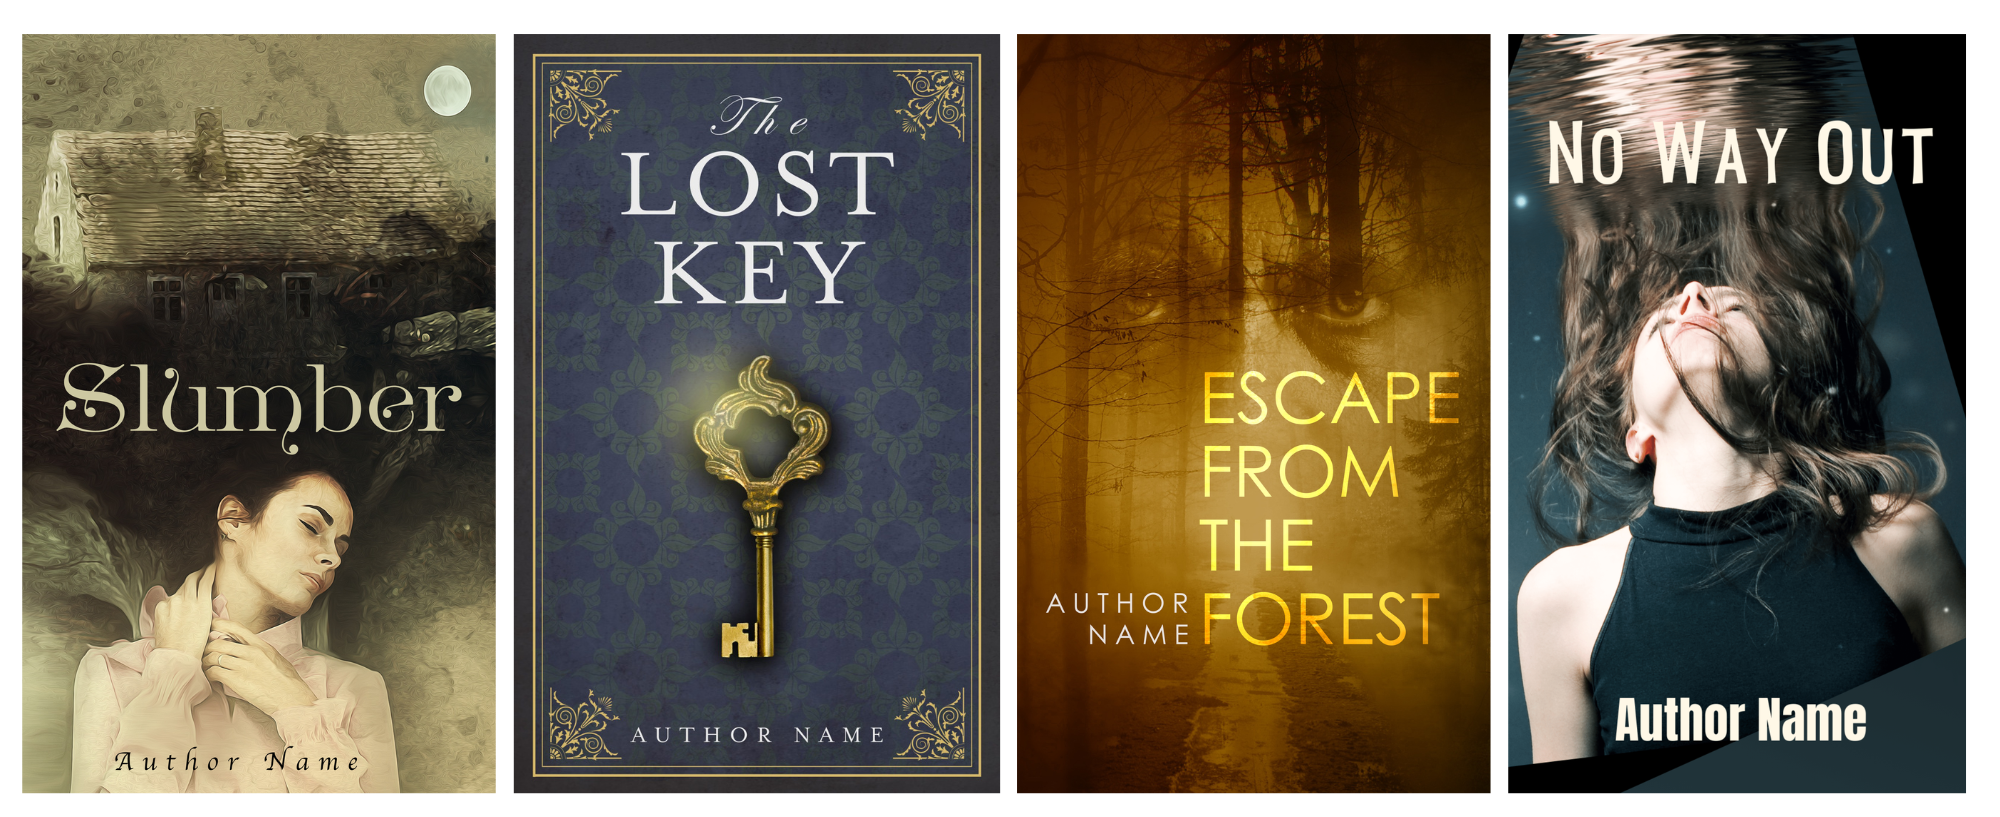 A book series comprised of four covers in a row. Titles from left to right: "Slumber" showing a pensive woman holding a key; "The Lost Key" depicting a golden key on a blue background; "Escape from the Forest" featuring a woman's intense gaze with forest imagery; "No Way Out" showing a woman submerged in water. Each cover includes "Author Name. BookSelf Book Cover Design & Premade Book Covers